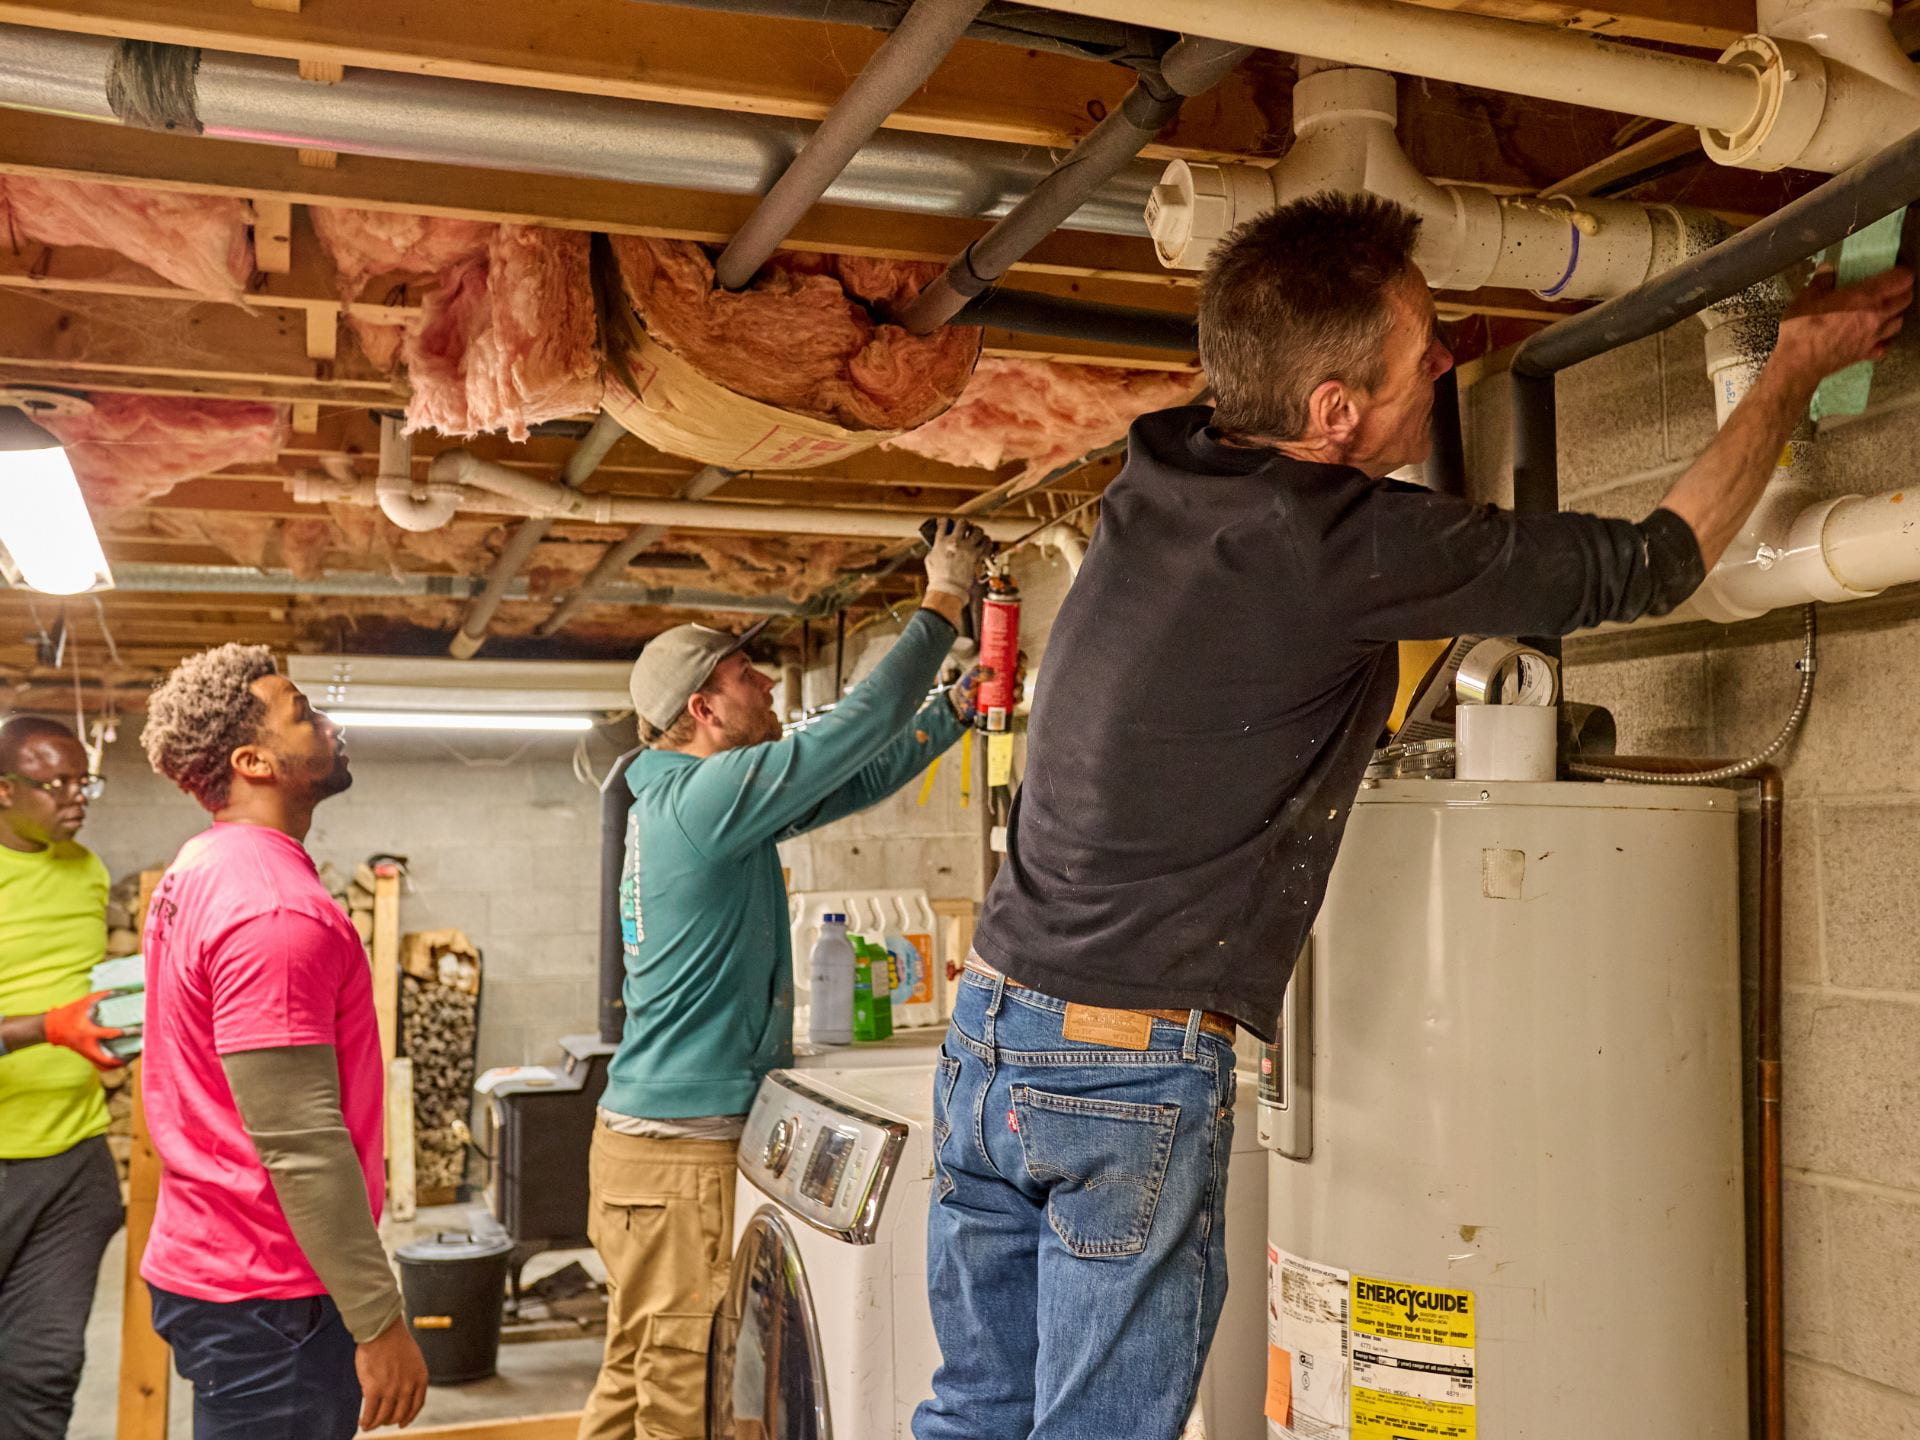 Four men stand on the left side of the frame, looking and working with their hands on the rim joist in the top right of the frame in a well-list basement with insulation overhead